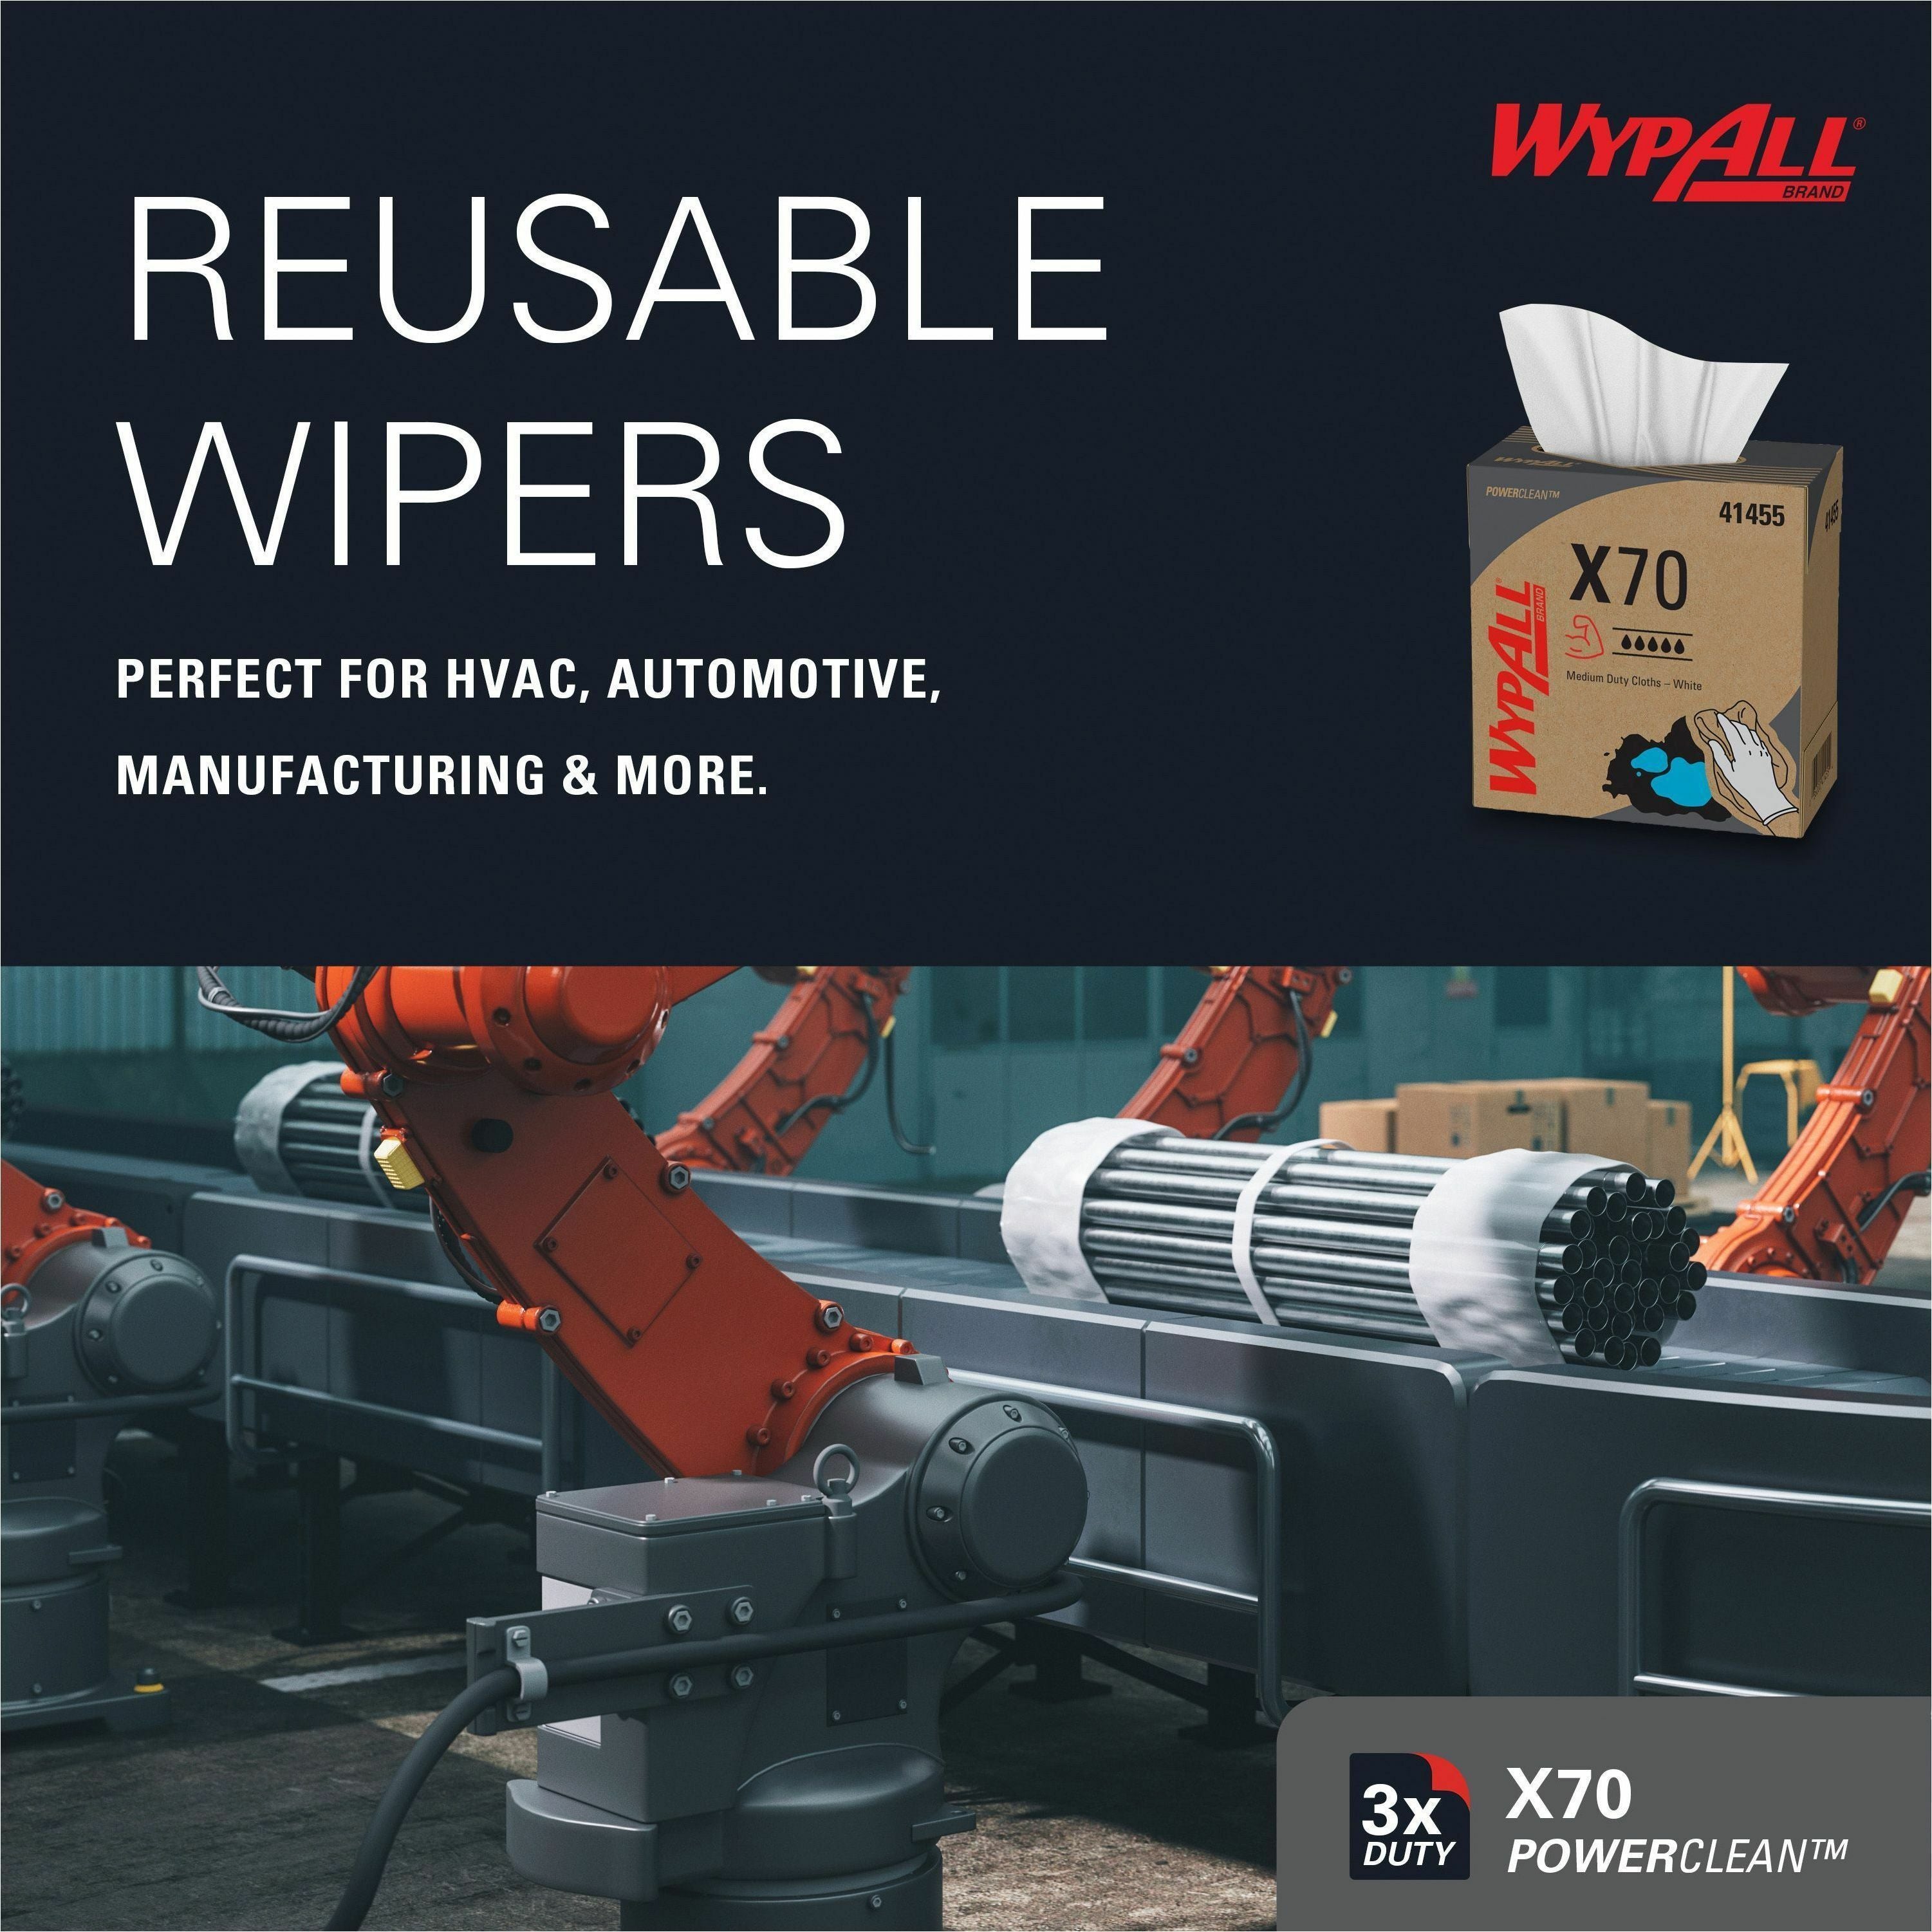 wypall-powerclean-x70-medium-duty-cloths-pop-up-box-834-x-1680-white-hydroknit-durable-absorbent-strong-reusable-embossed-for-multipurpose-100-per-box-1000-carton_kcc41455ct - 3